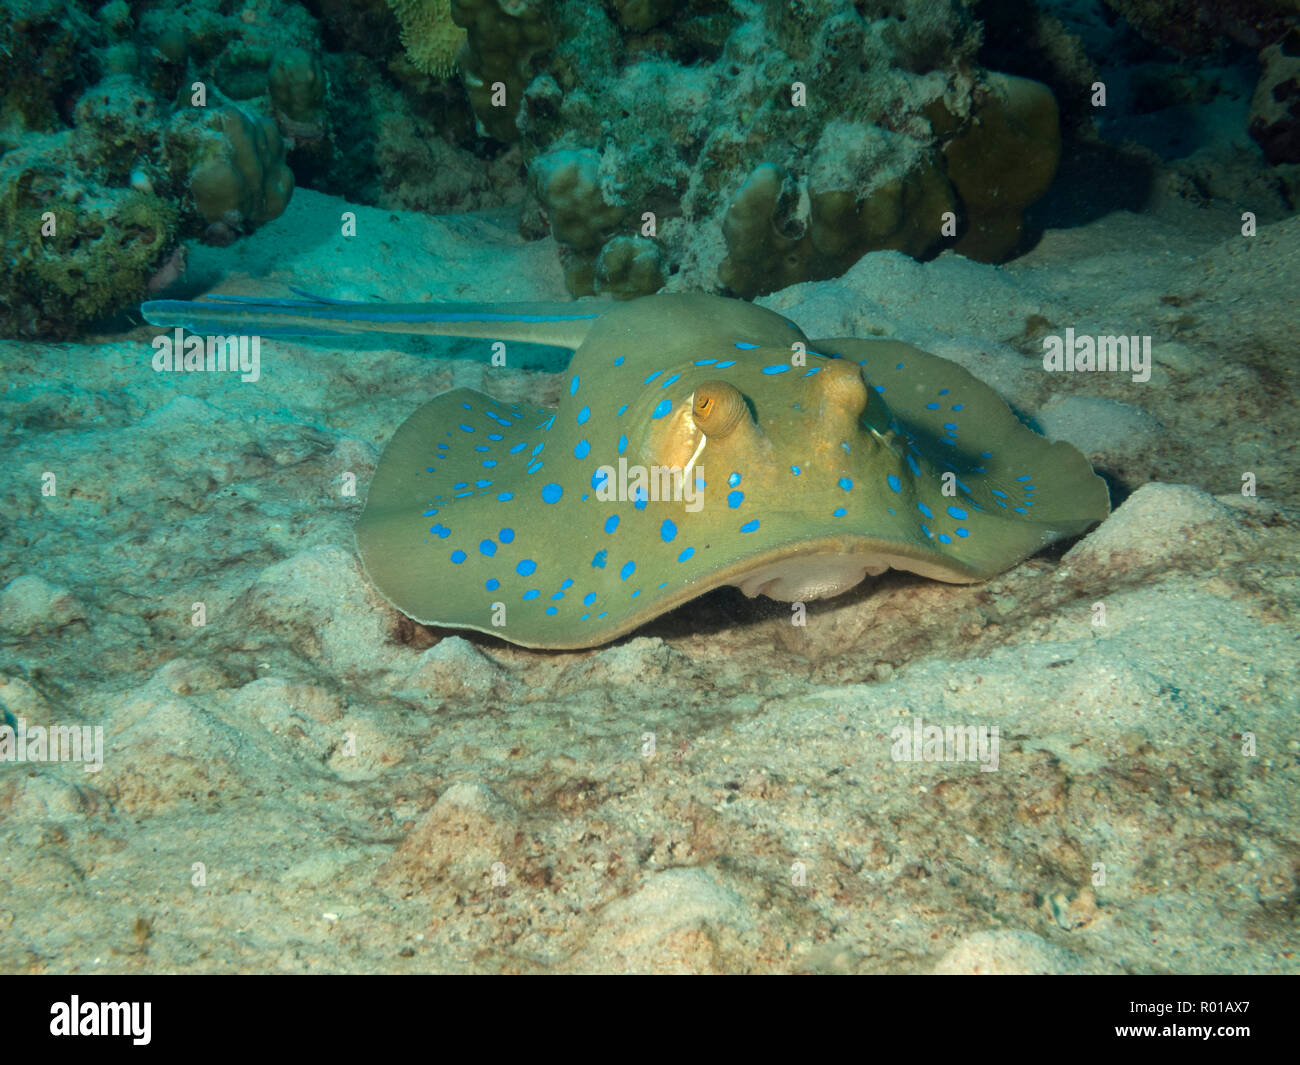 Blue spotted Stingray or Bluespotted ribbontail ray, Taeniura lymma, on Seabed, Red Sea, Egypt Stock Photo